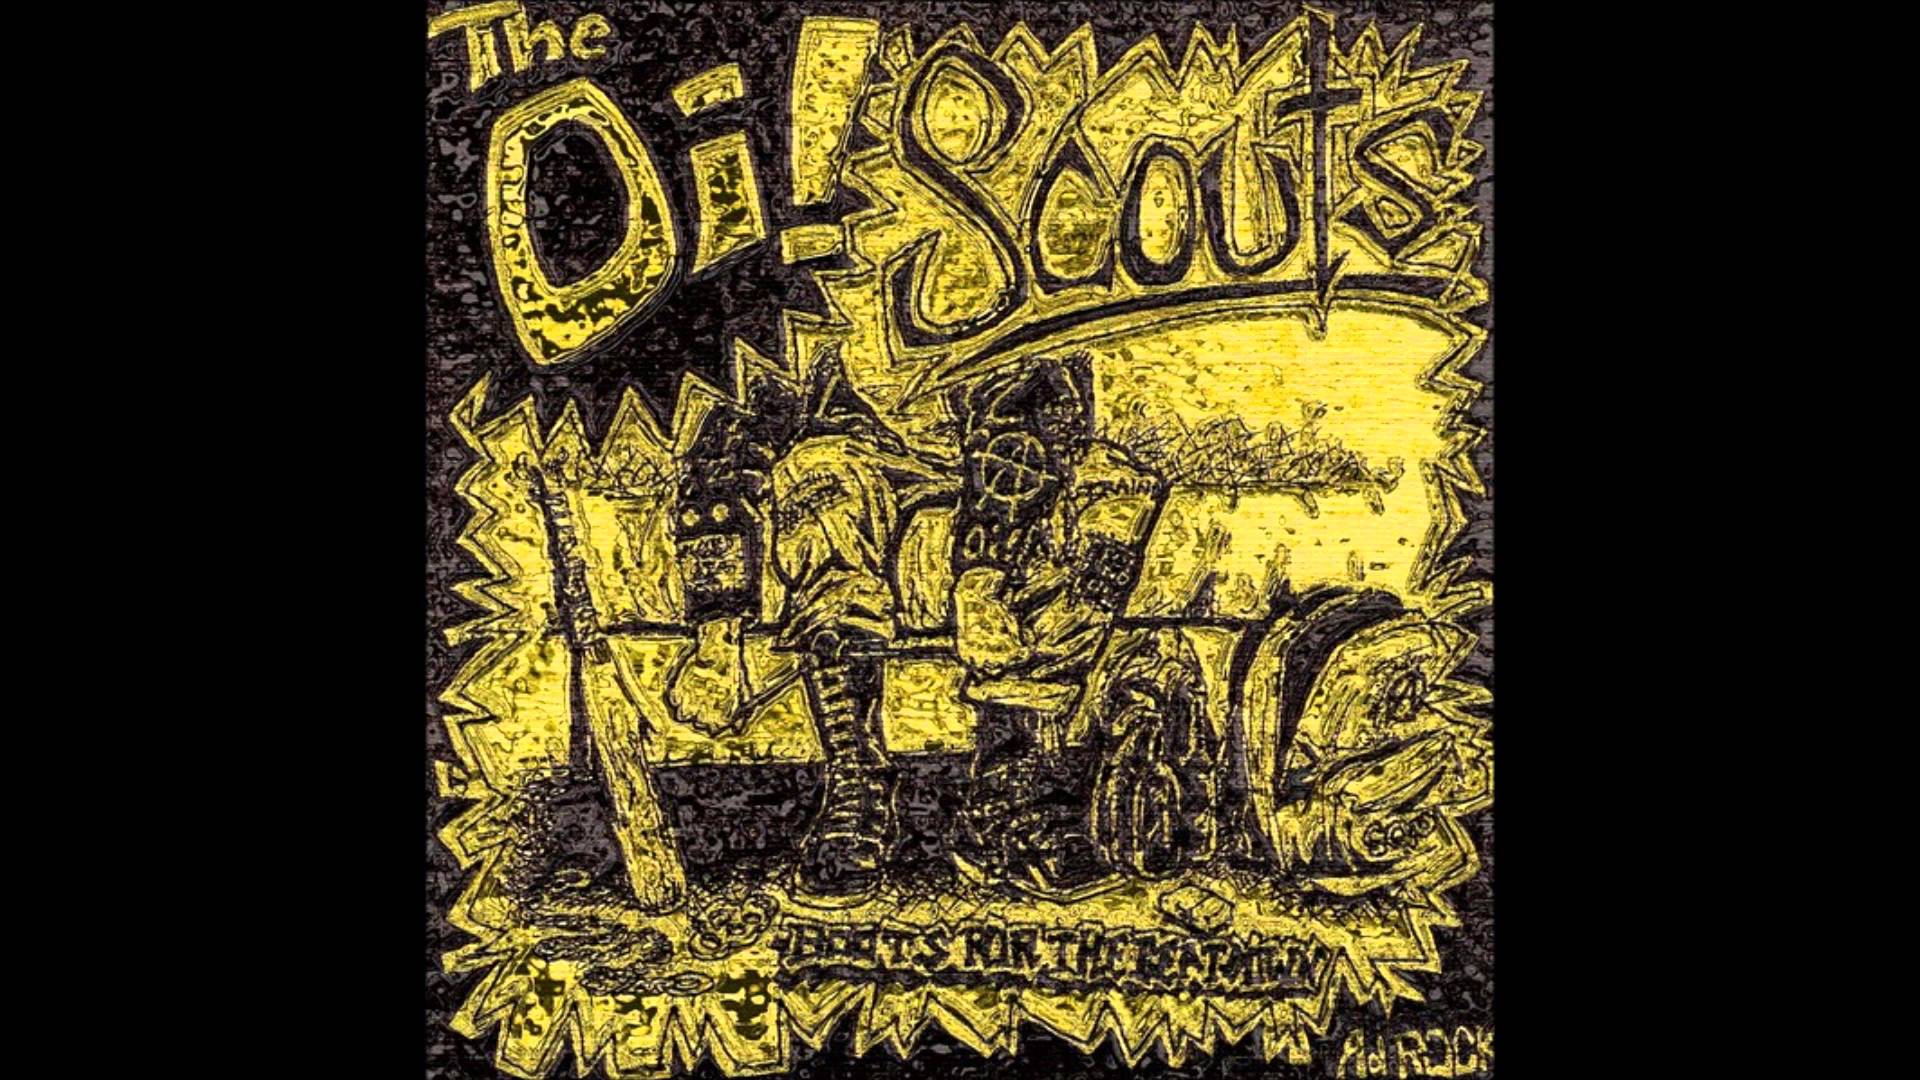 The Oi! Scouts For The Beatdown (Full Album)